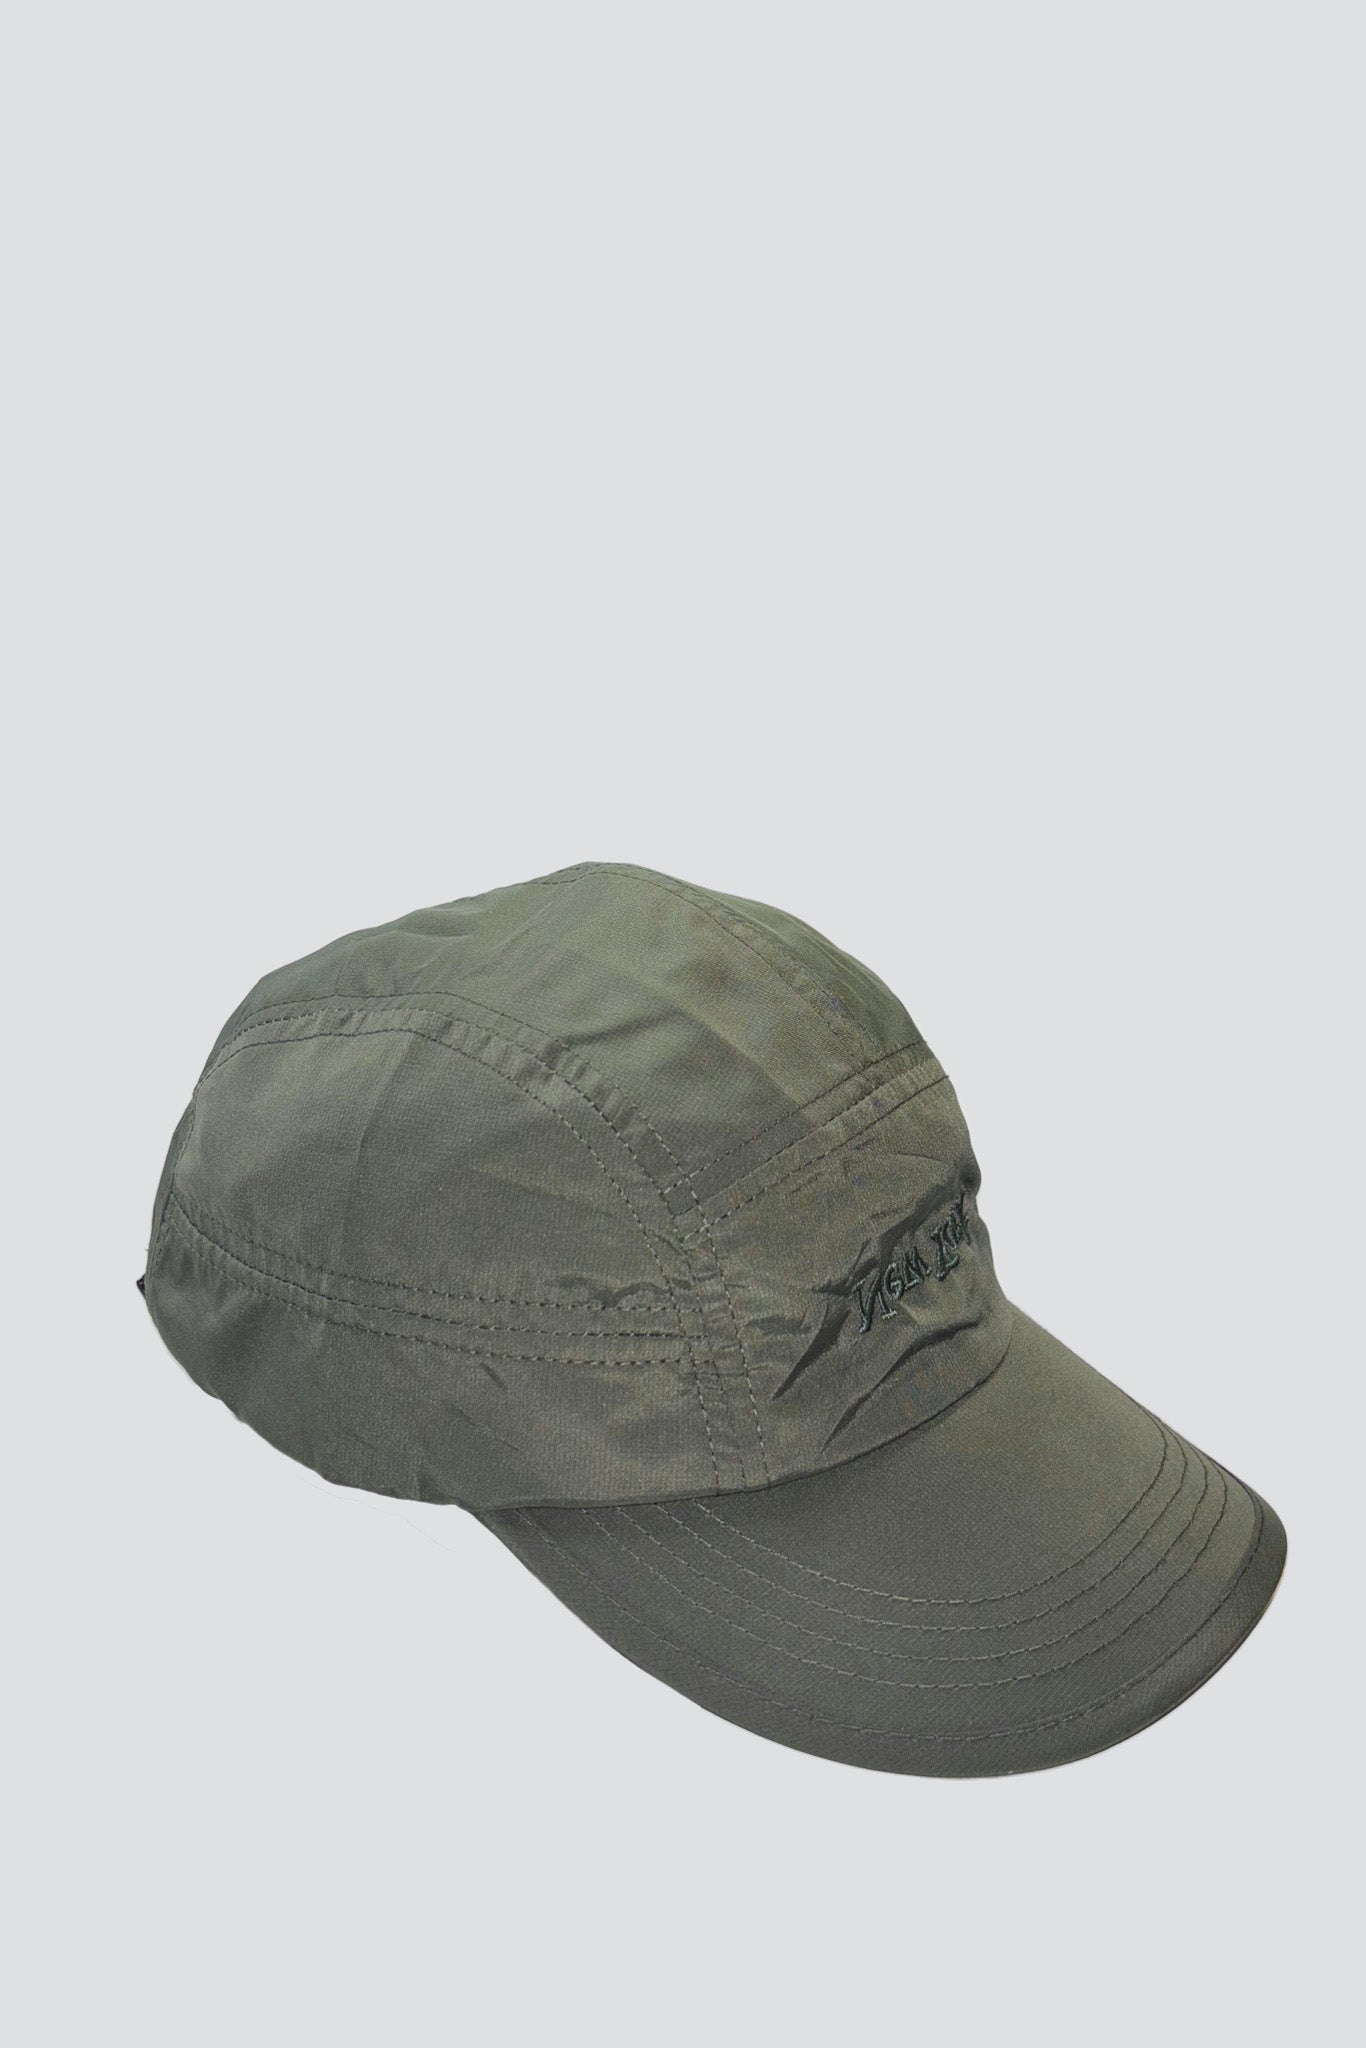 Nylon New York Embroidered Dry Hat - Green